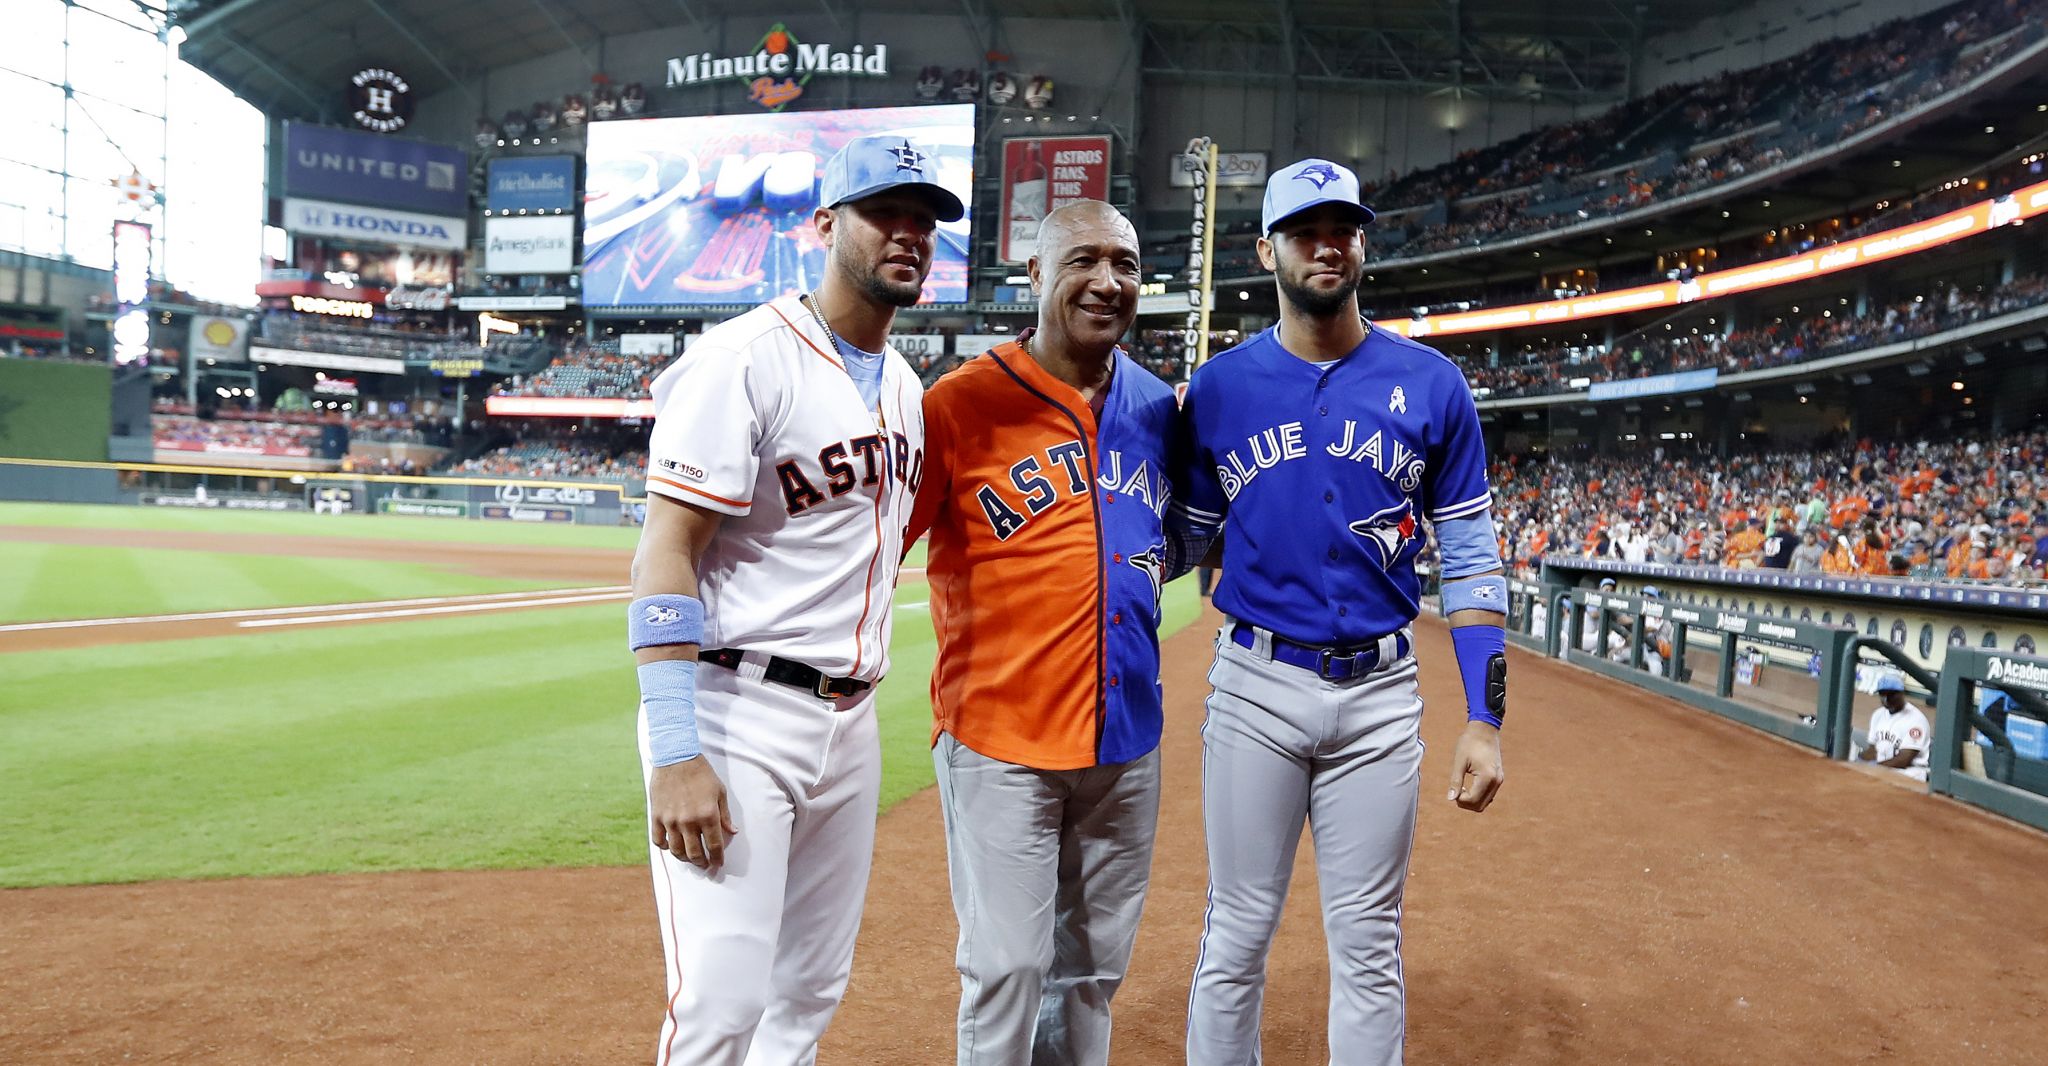 Gurriel family celebrates Father's Day at Minute Maid Park